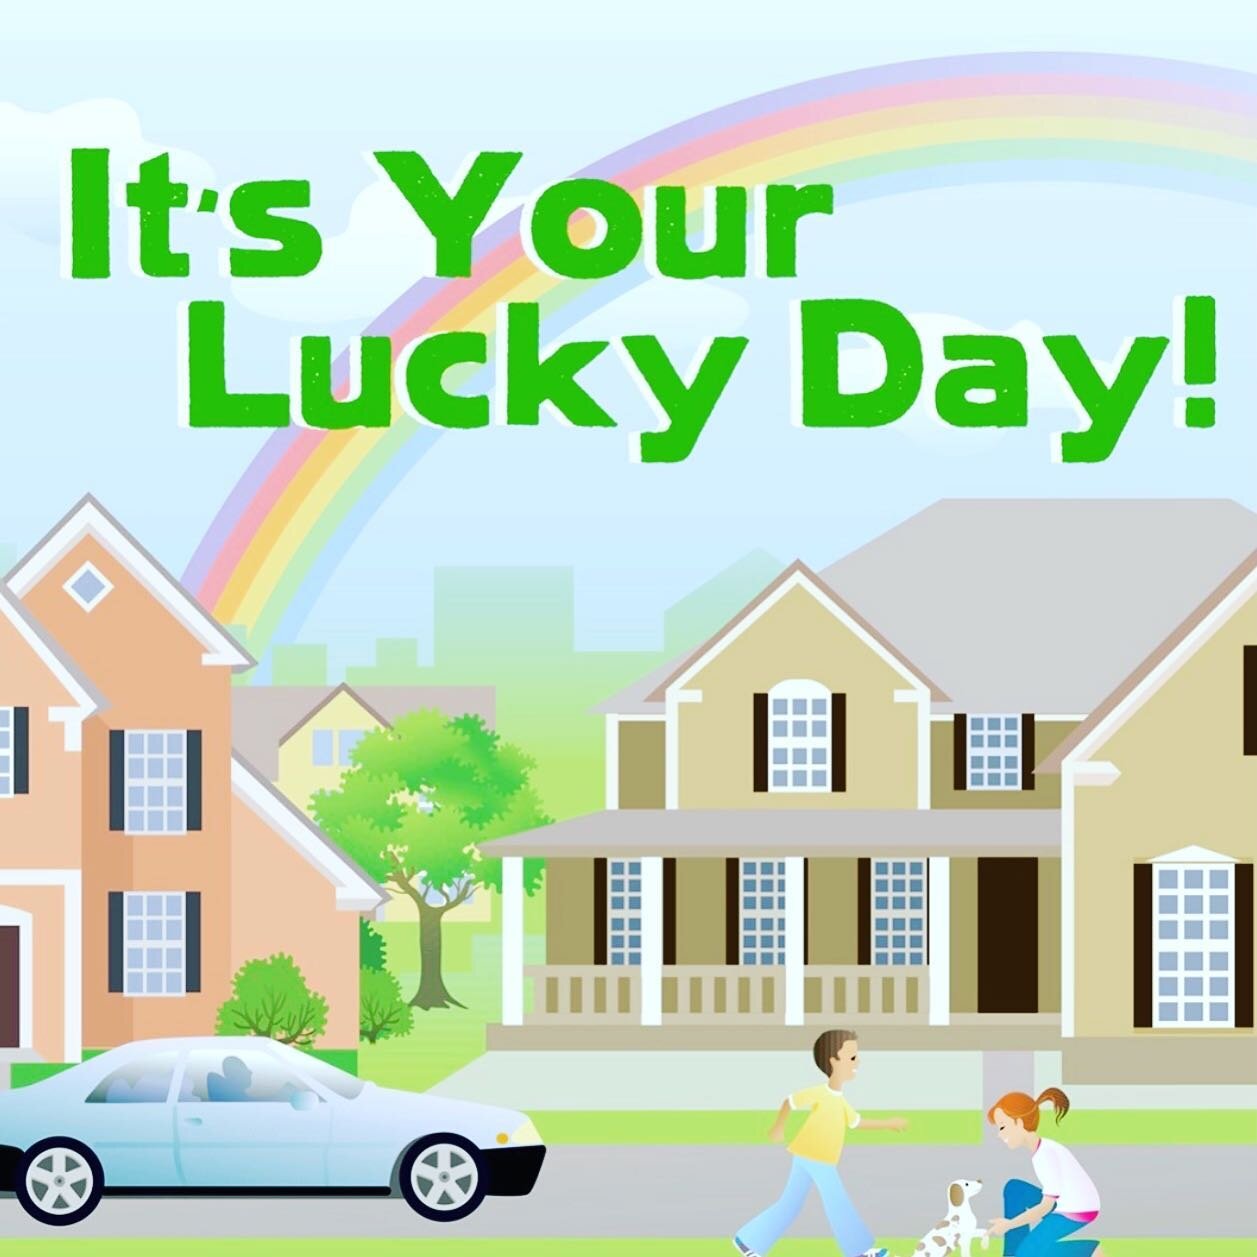 Happy St. Patrick&rsquo;s Day!! ☘️☘️ For all those lucky buyers out there who have found their dream home, we are here to help with all your closing needs. We are an attorney-owned title insurance company with over 30+ years of combined experience se